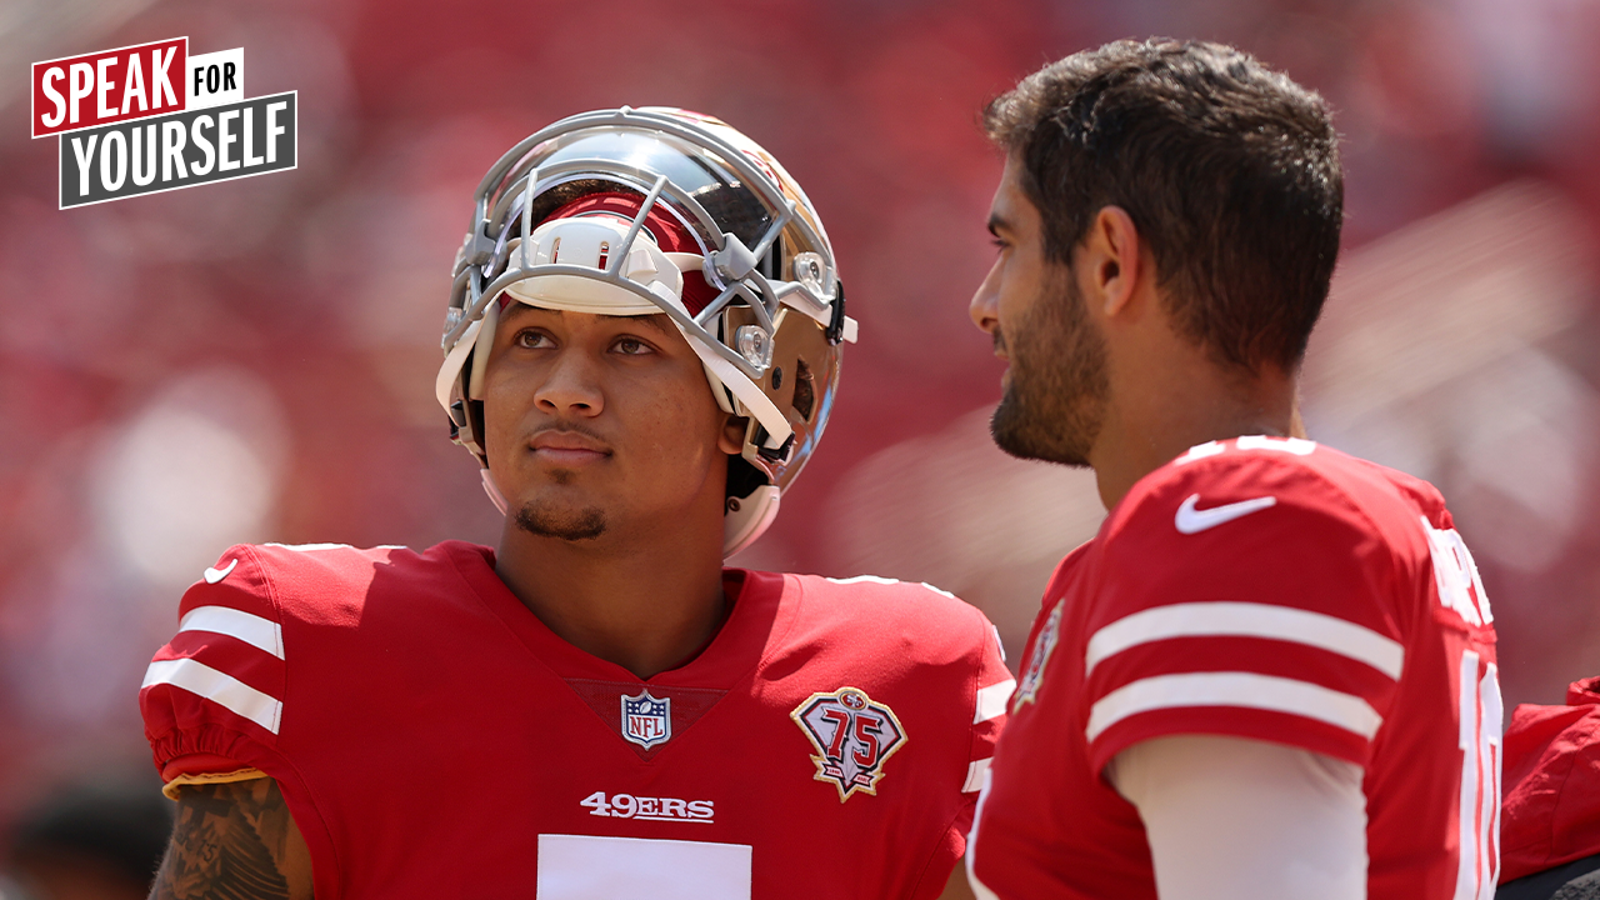 Marcellus Wiley: Both Jimmy G & Trey Lance will suffer from 49ers' 2-QB system I SPEAK FOR YOURSELF